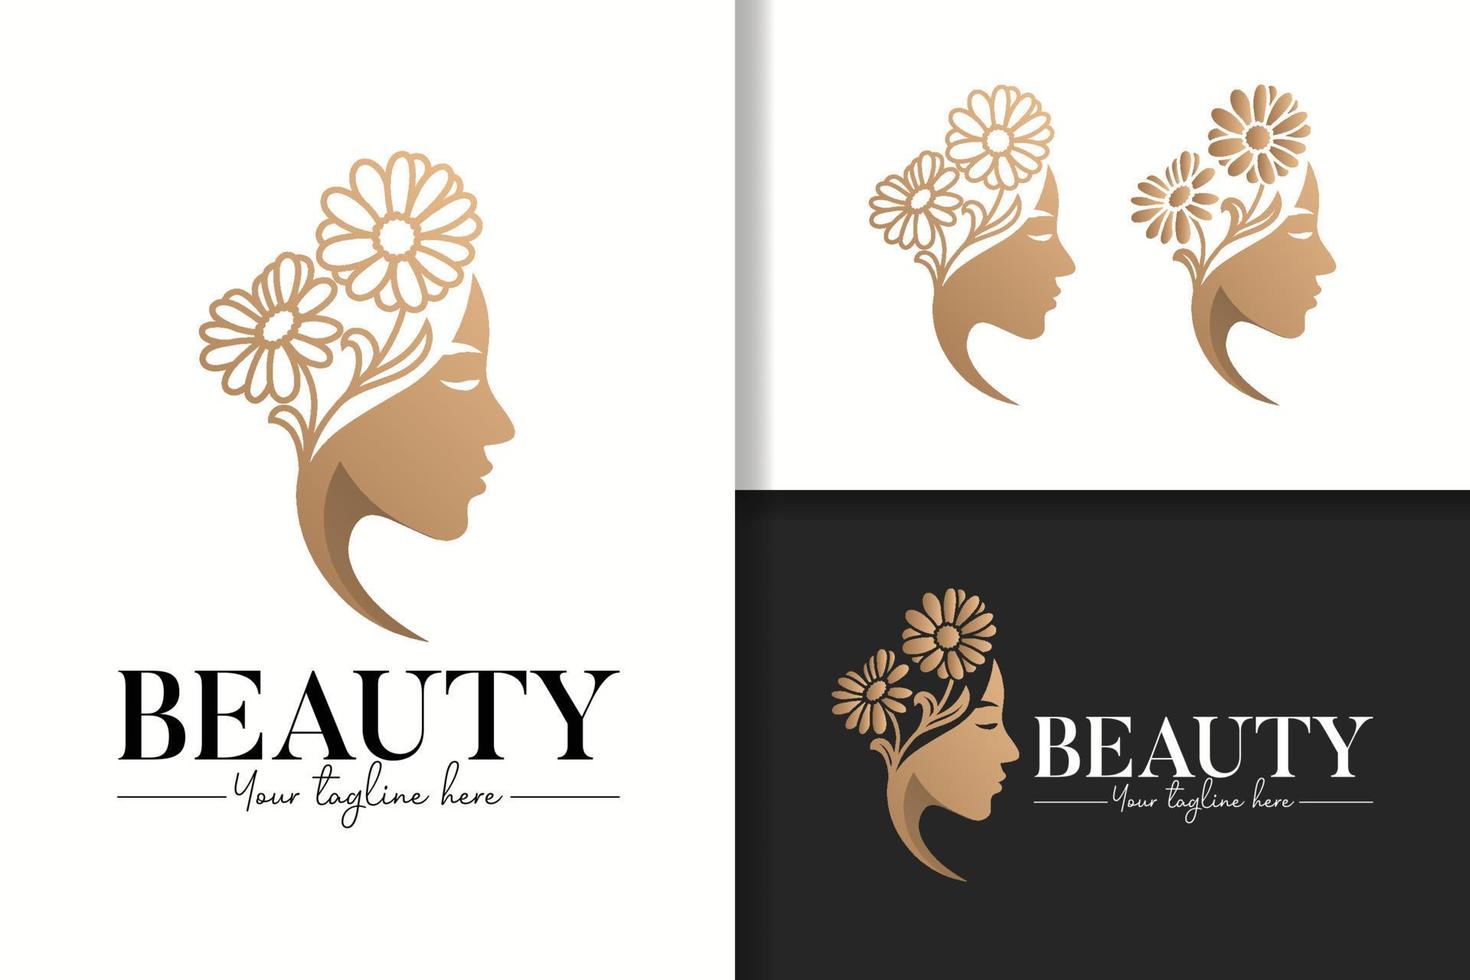 Beauty woman with sunflowers gold logo vector